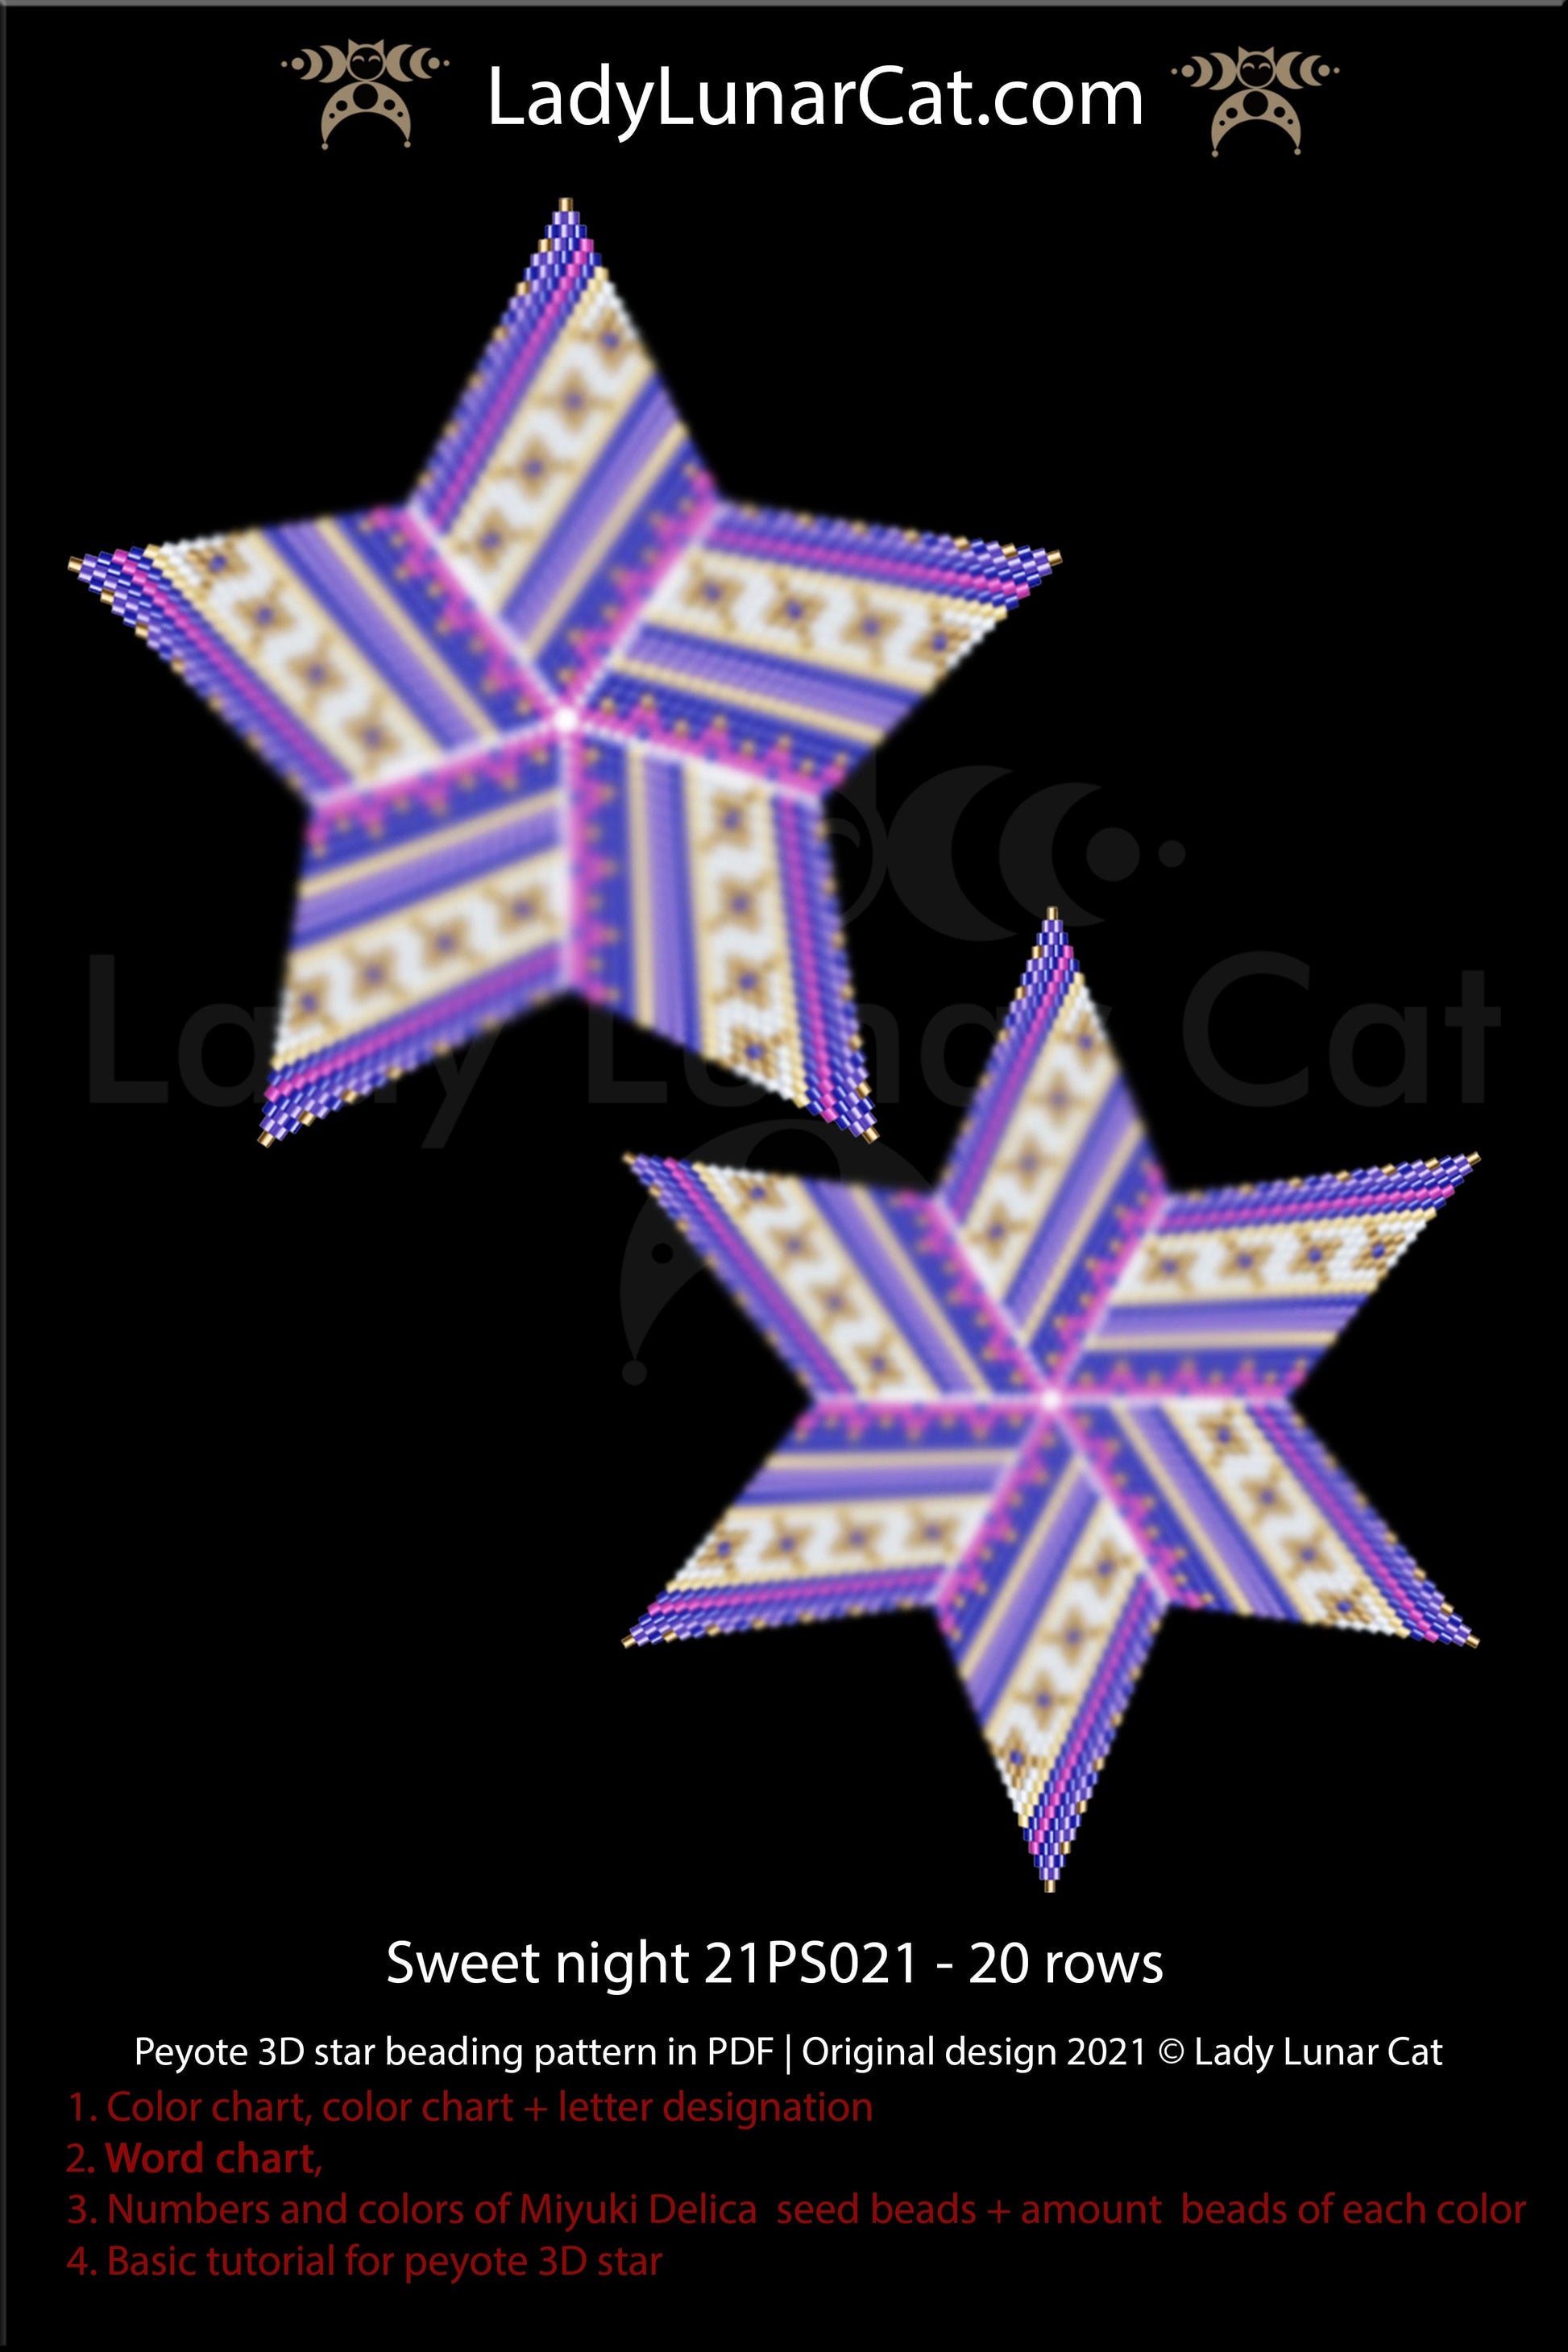 Beaded star pattern for beading- Sweet night 21PS021 20 rows LadyLunarCat